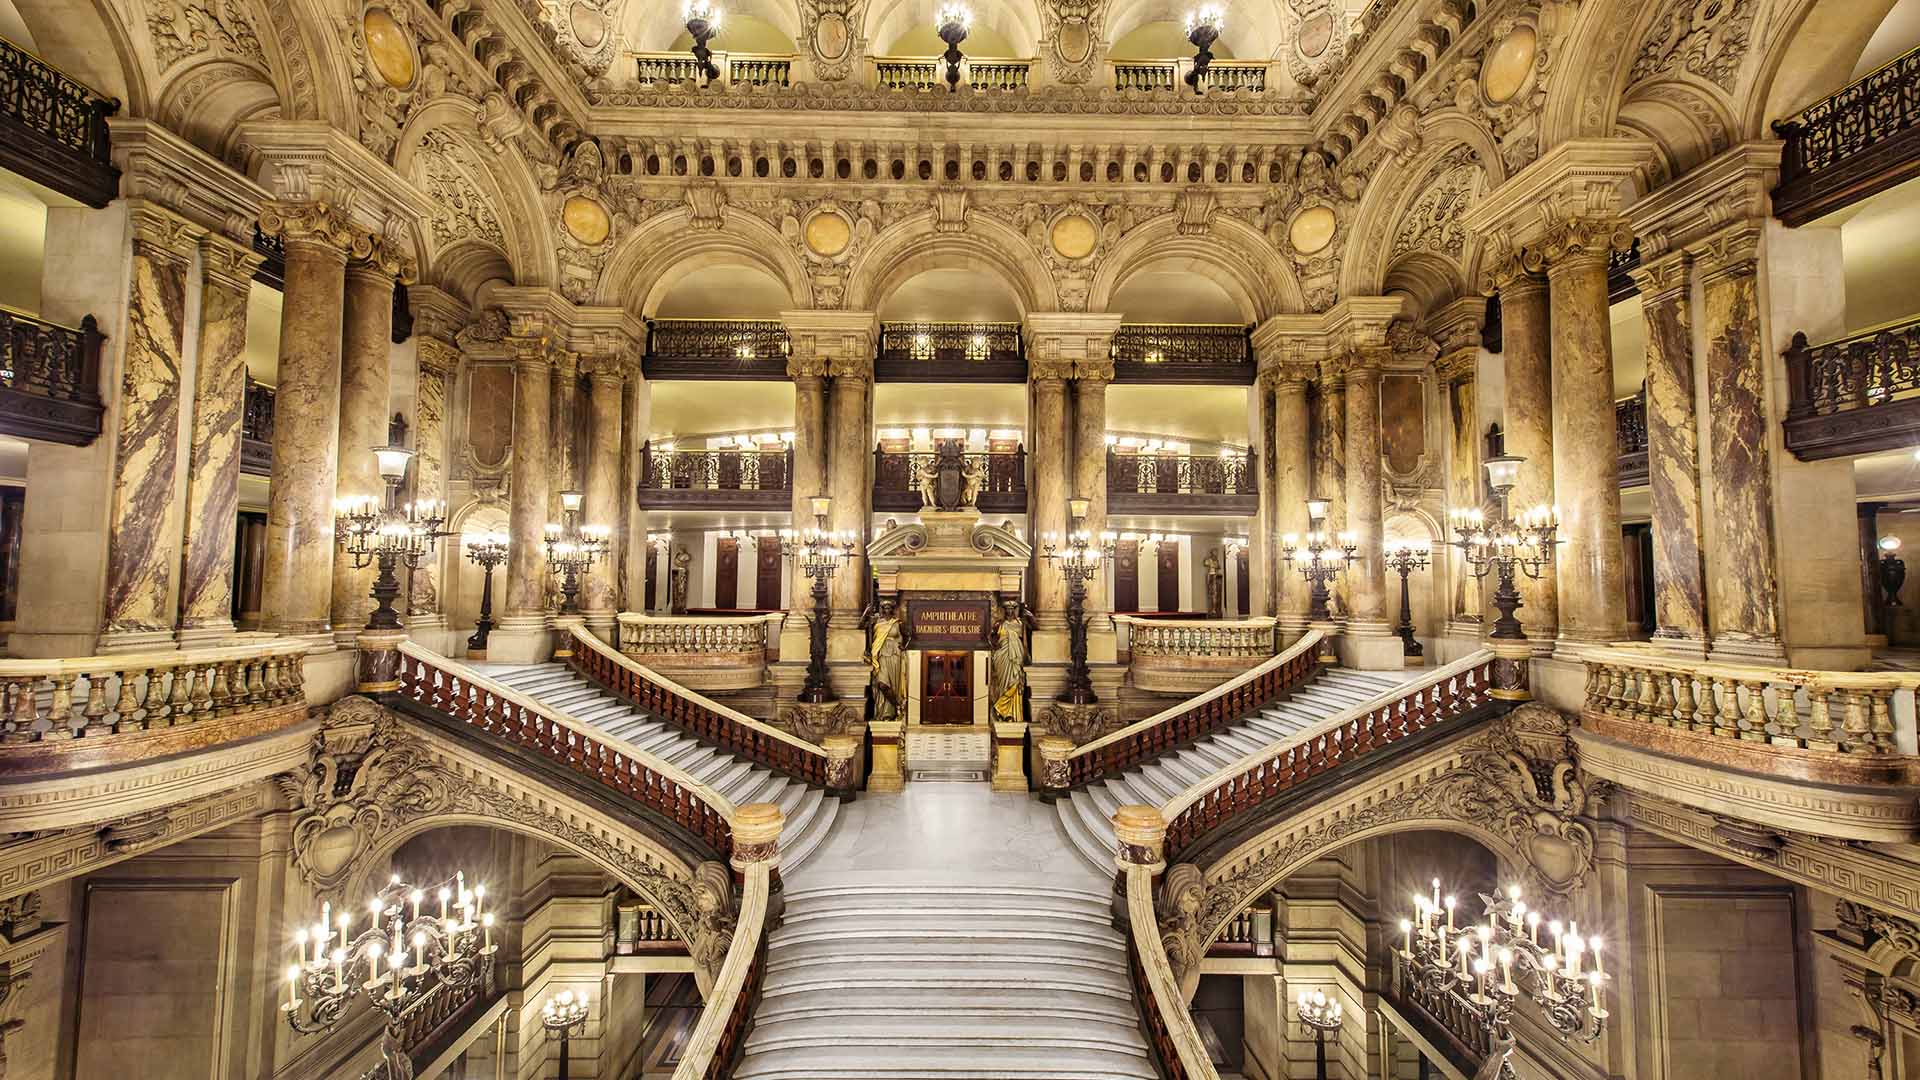 The Paris Theatre That Inspired 'The Phantom of the Opera' Is Hosting Its First-Ever Overnight Stay